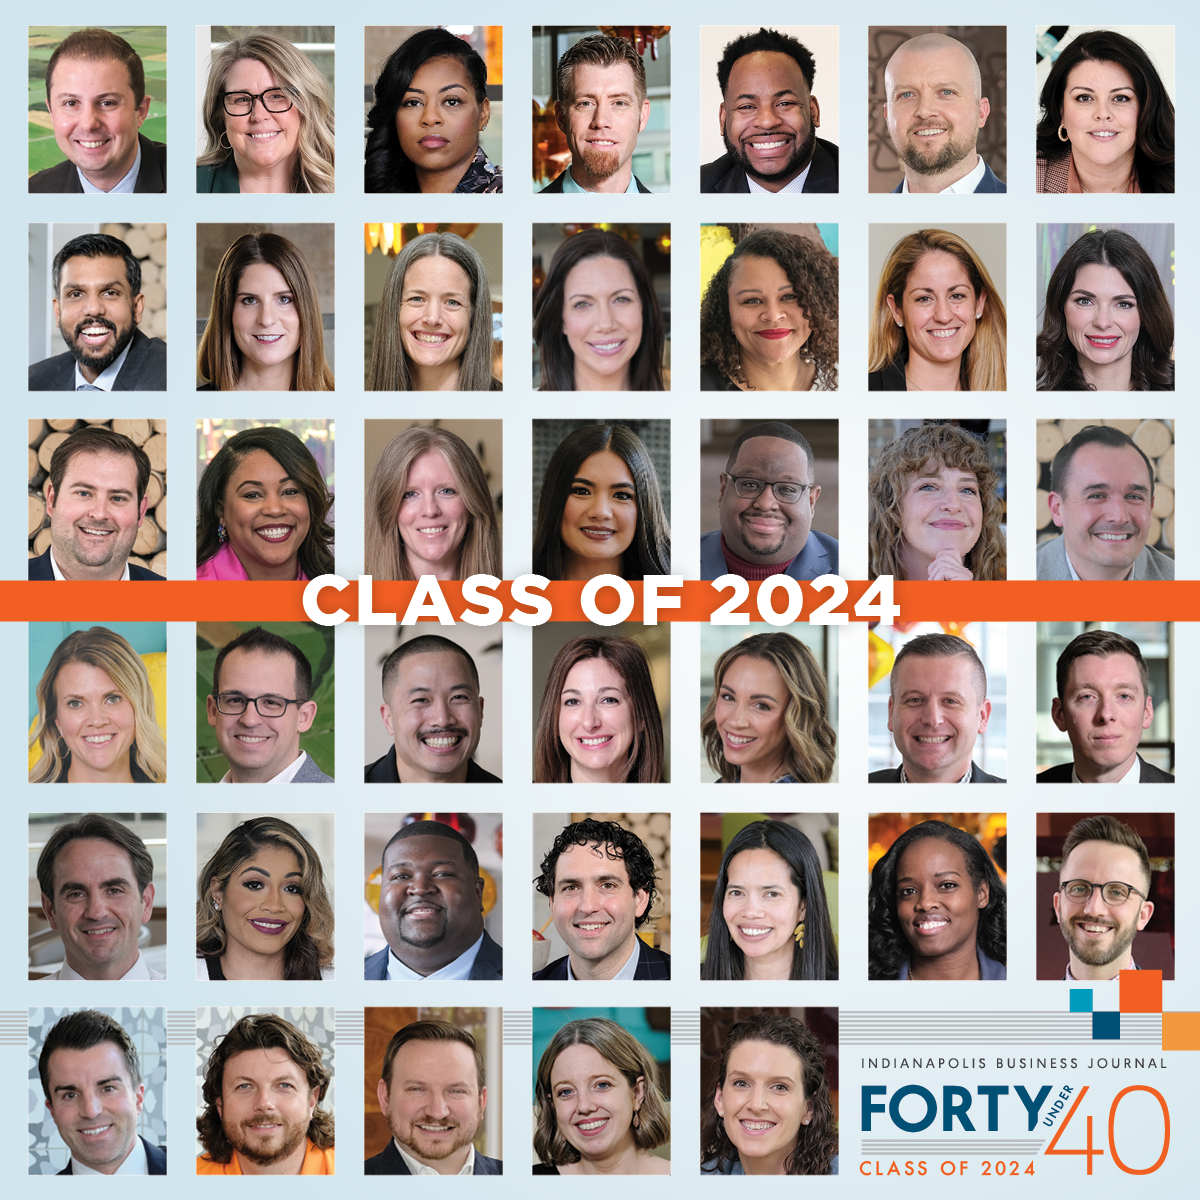 Jacob Blasdel named an Honoree for IBJ's "Forty Under 40" Class of 2024!